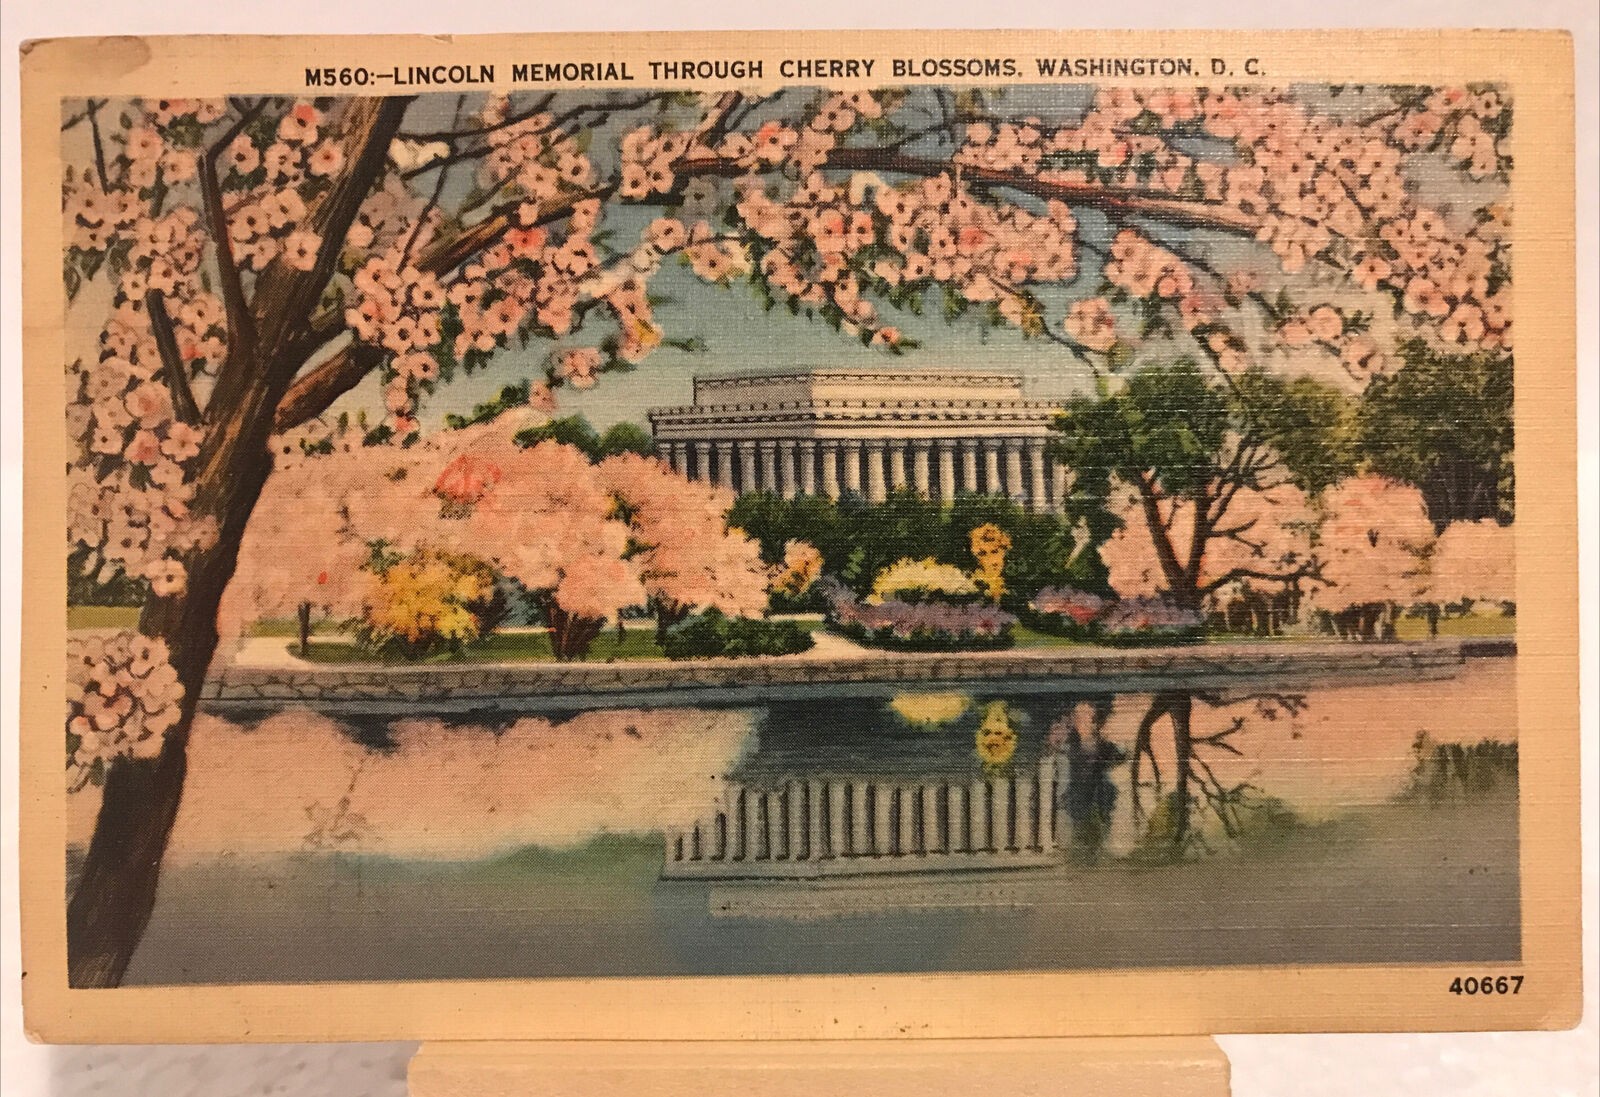 Vintage Postcard- 1938 View of Lincoln Memorial Through Cherry Blossoms